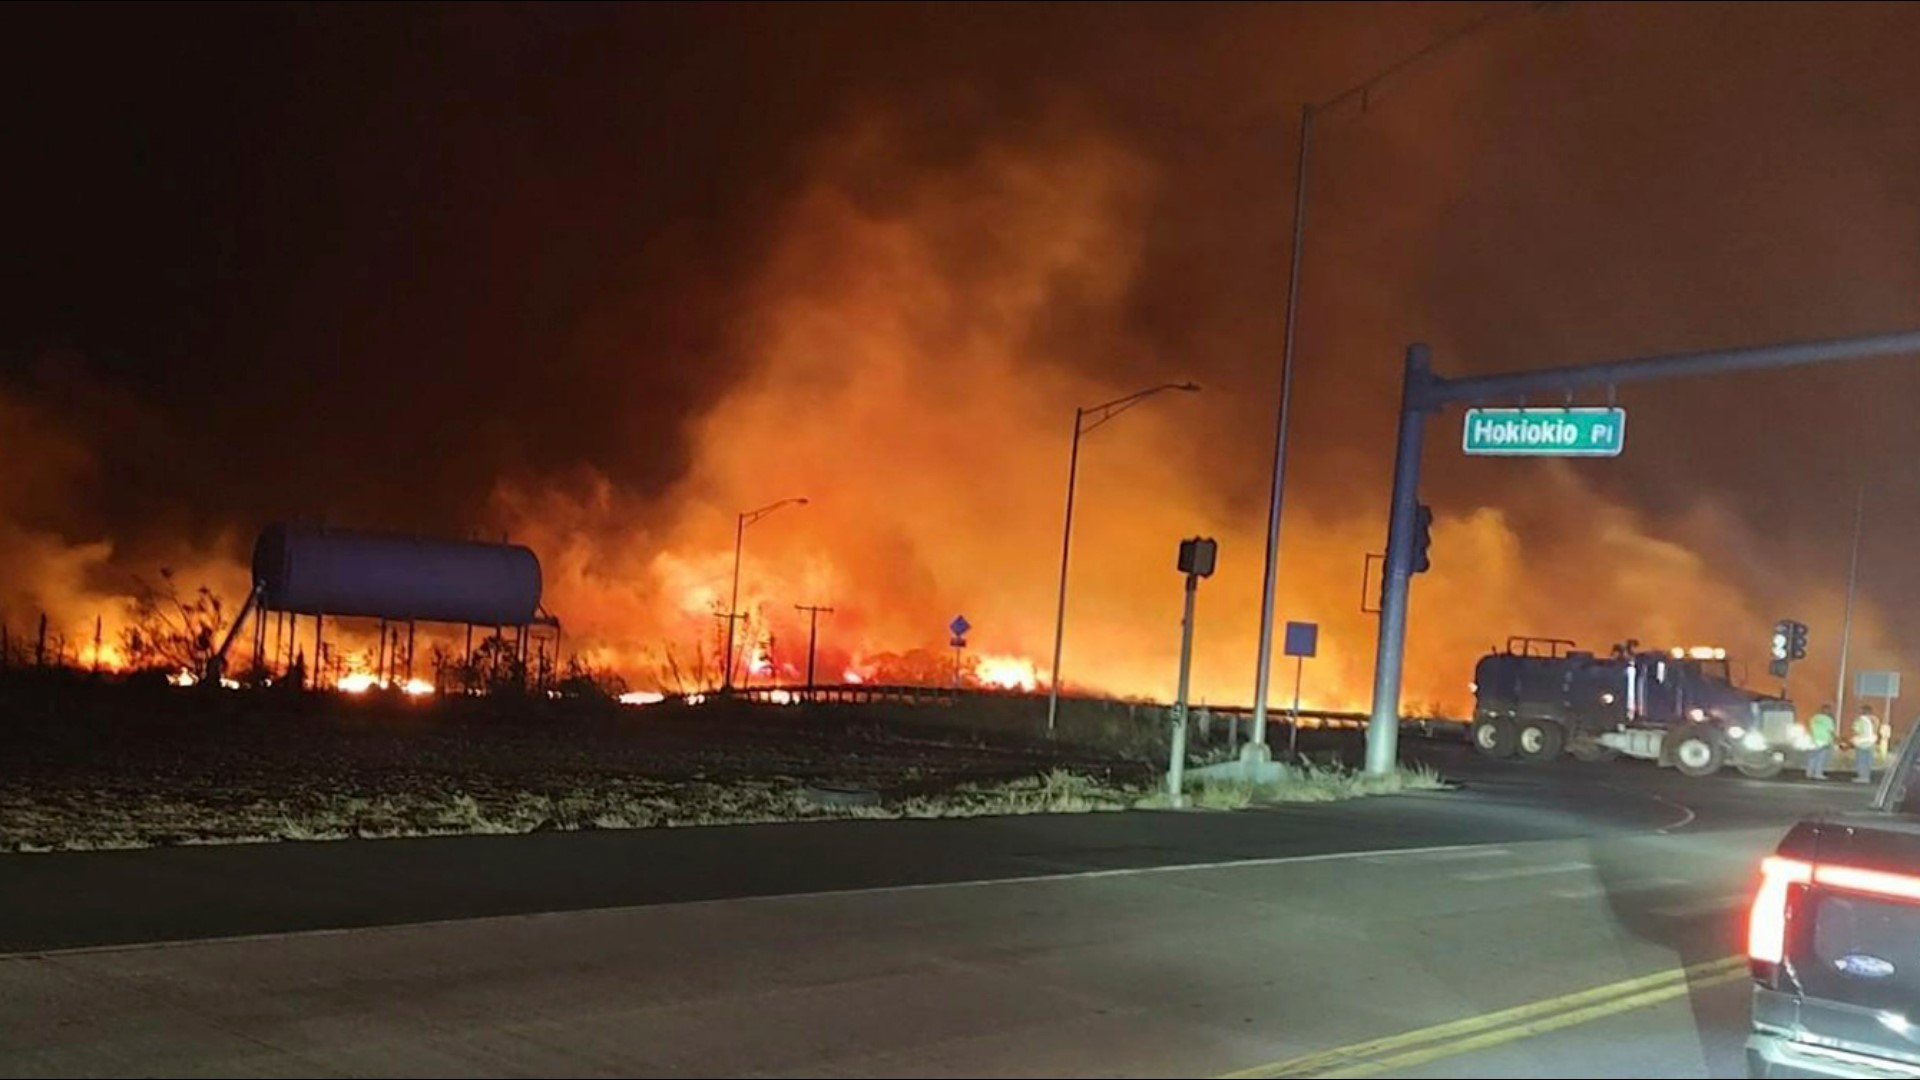 Wind-whipped wildfires raced through parts of Hawaii on Wednesday, burning down businesses in a historic town on the island of Maui, injuring several people.